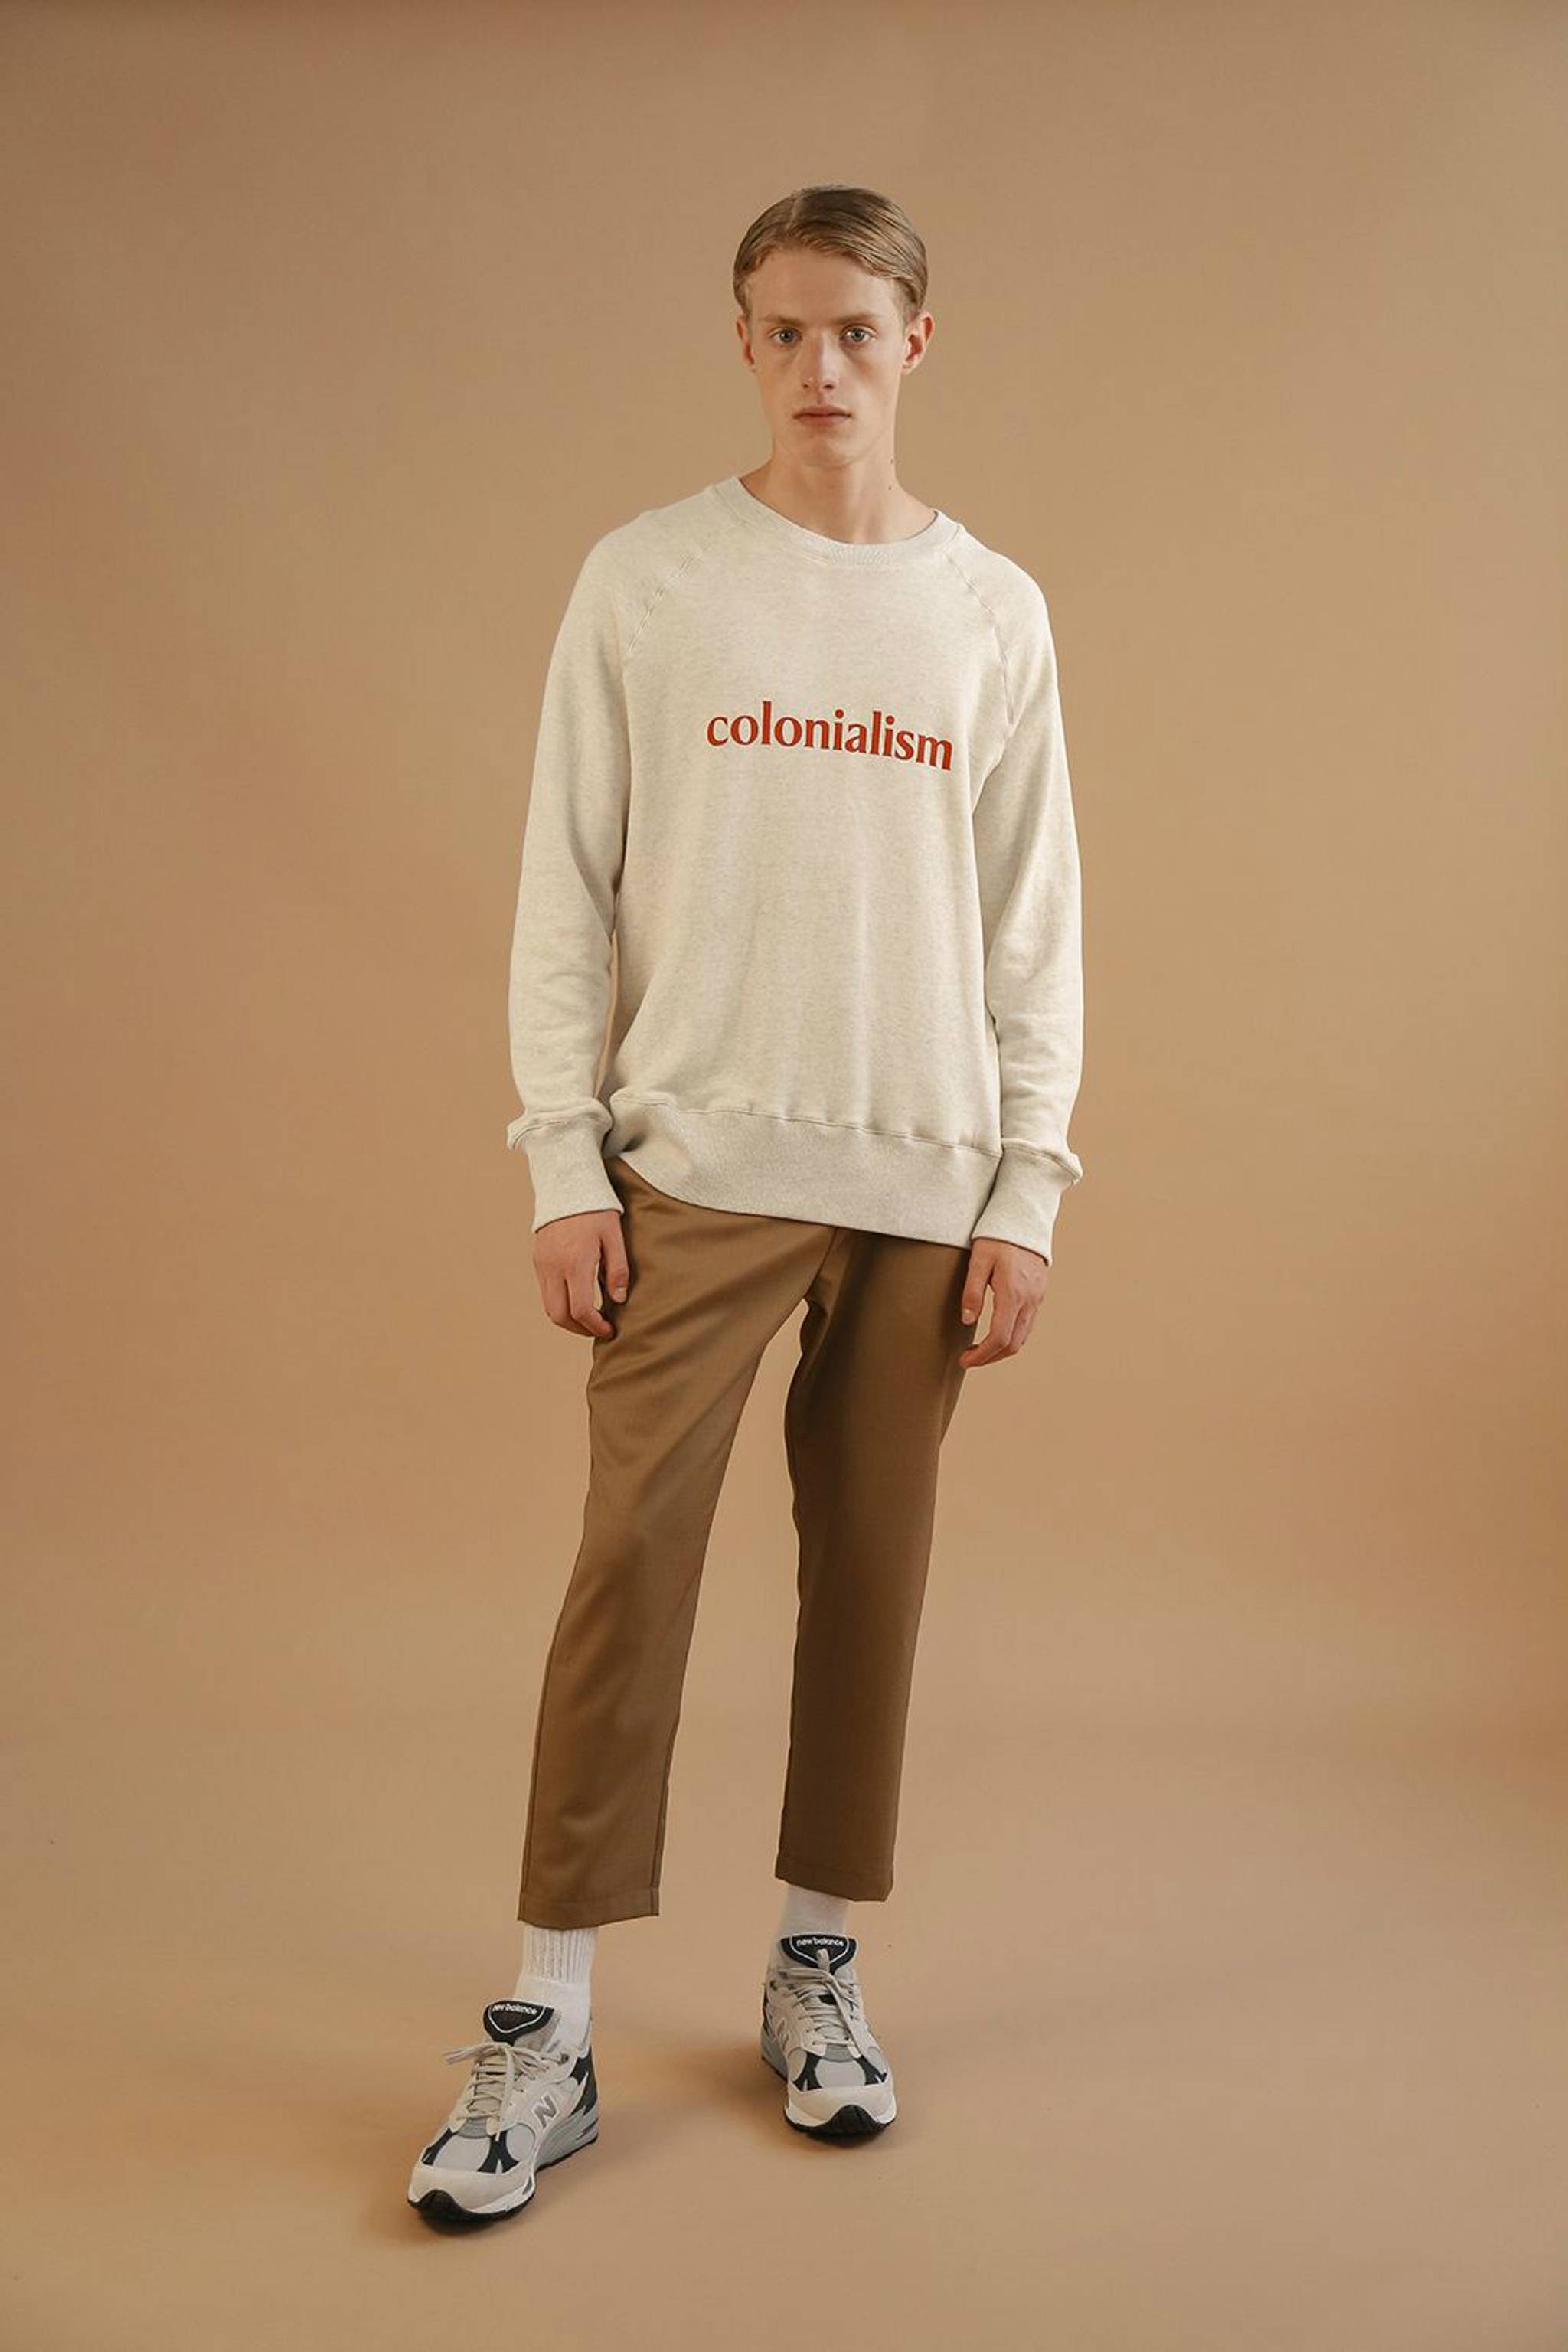 ‘Colonialism’ collection shows nostalgia’s dark side